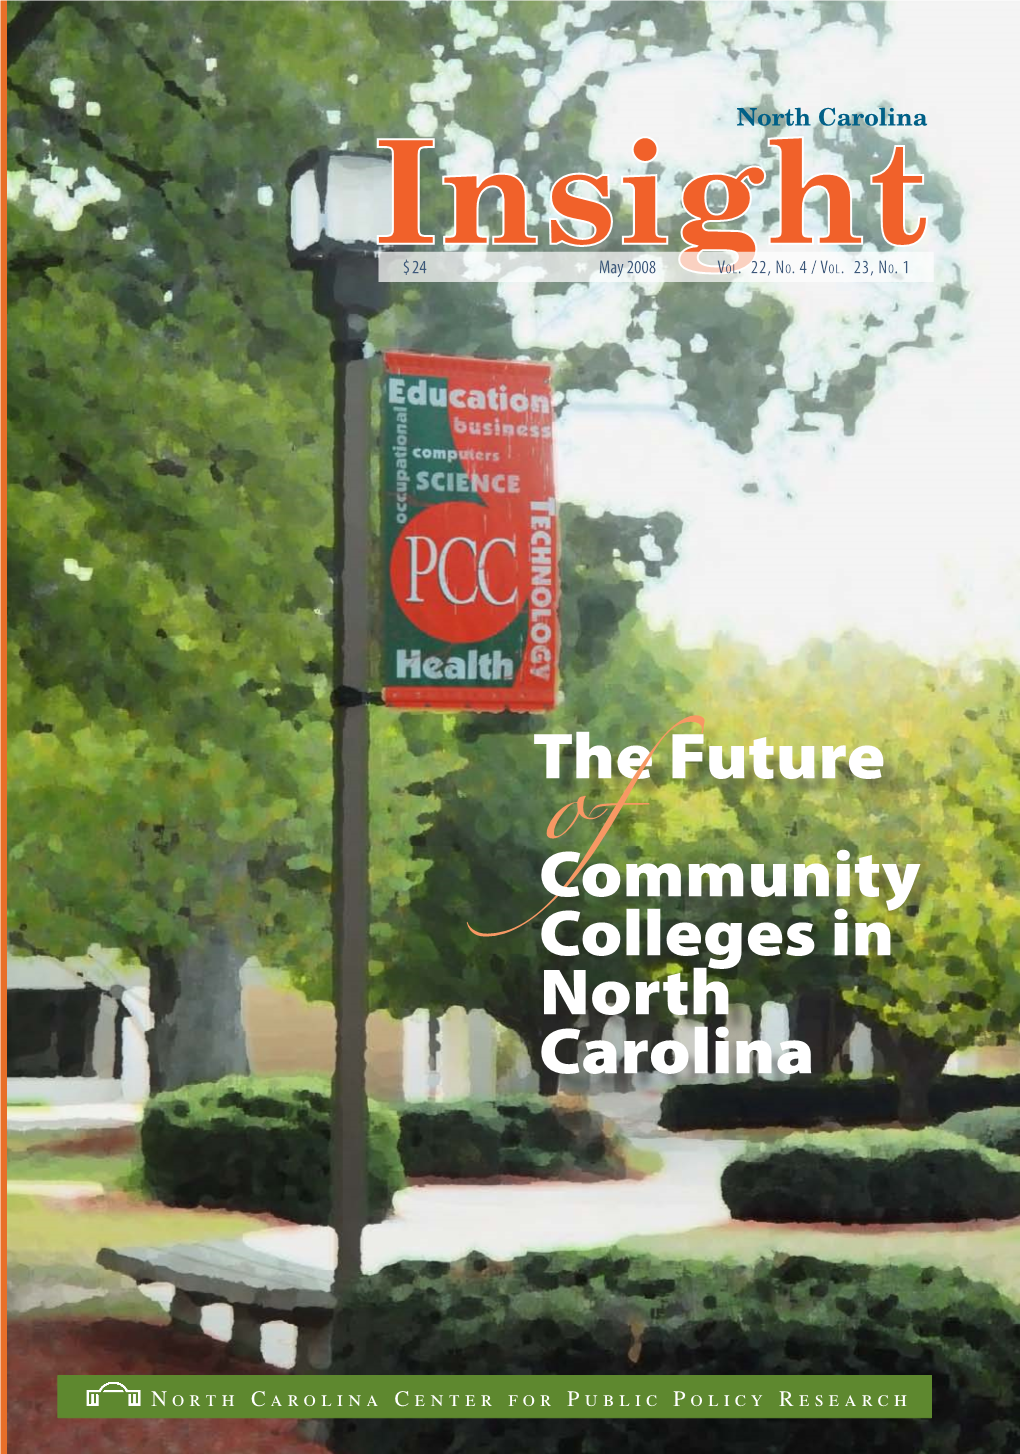 The Future of Community Colleges in North Carolina